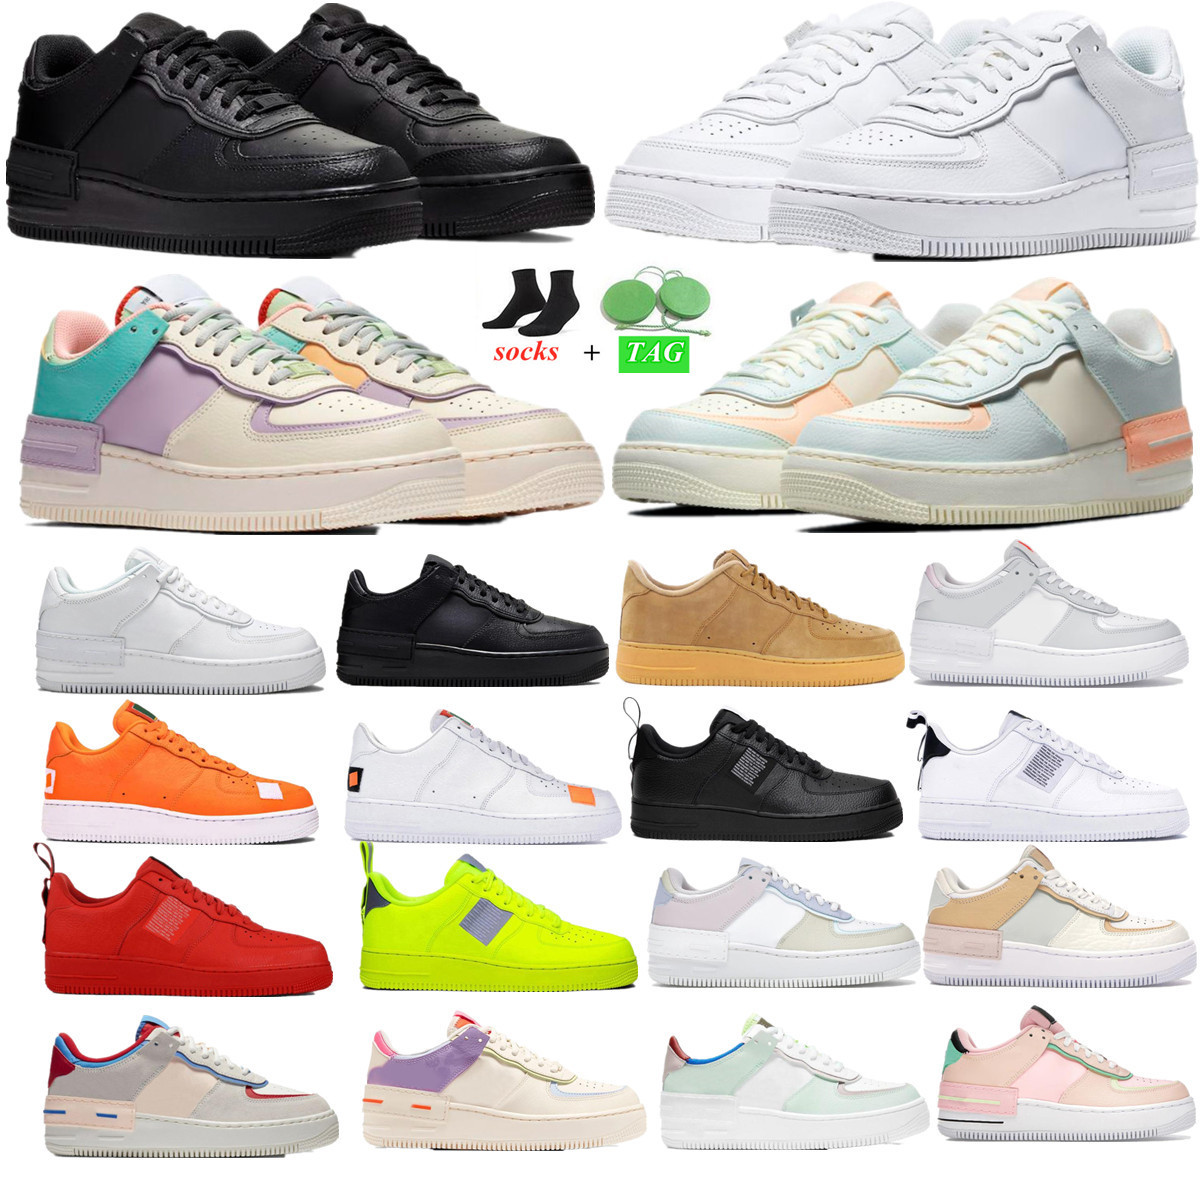 

men women casual shoes classic low shadow white flax black Pale Ivory Spruce Aura Pistachio Frost Infinite Lilac Coconut Milk platform sports sneakers trainers, Ar shoes